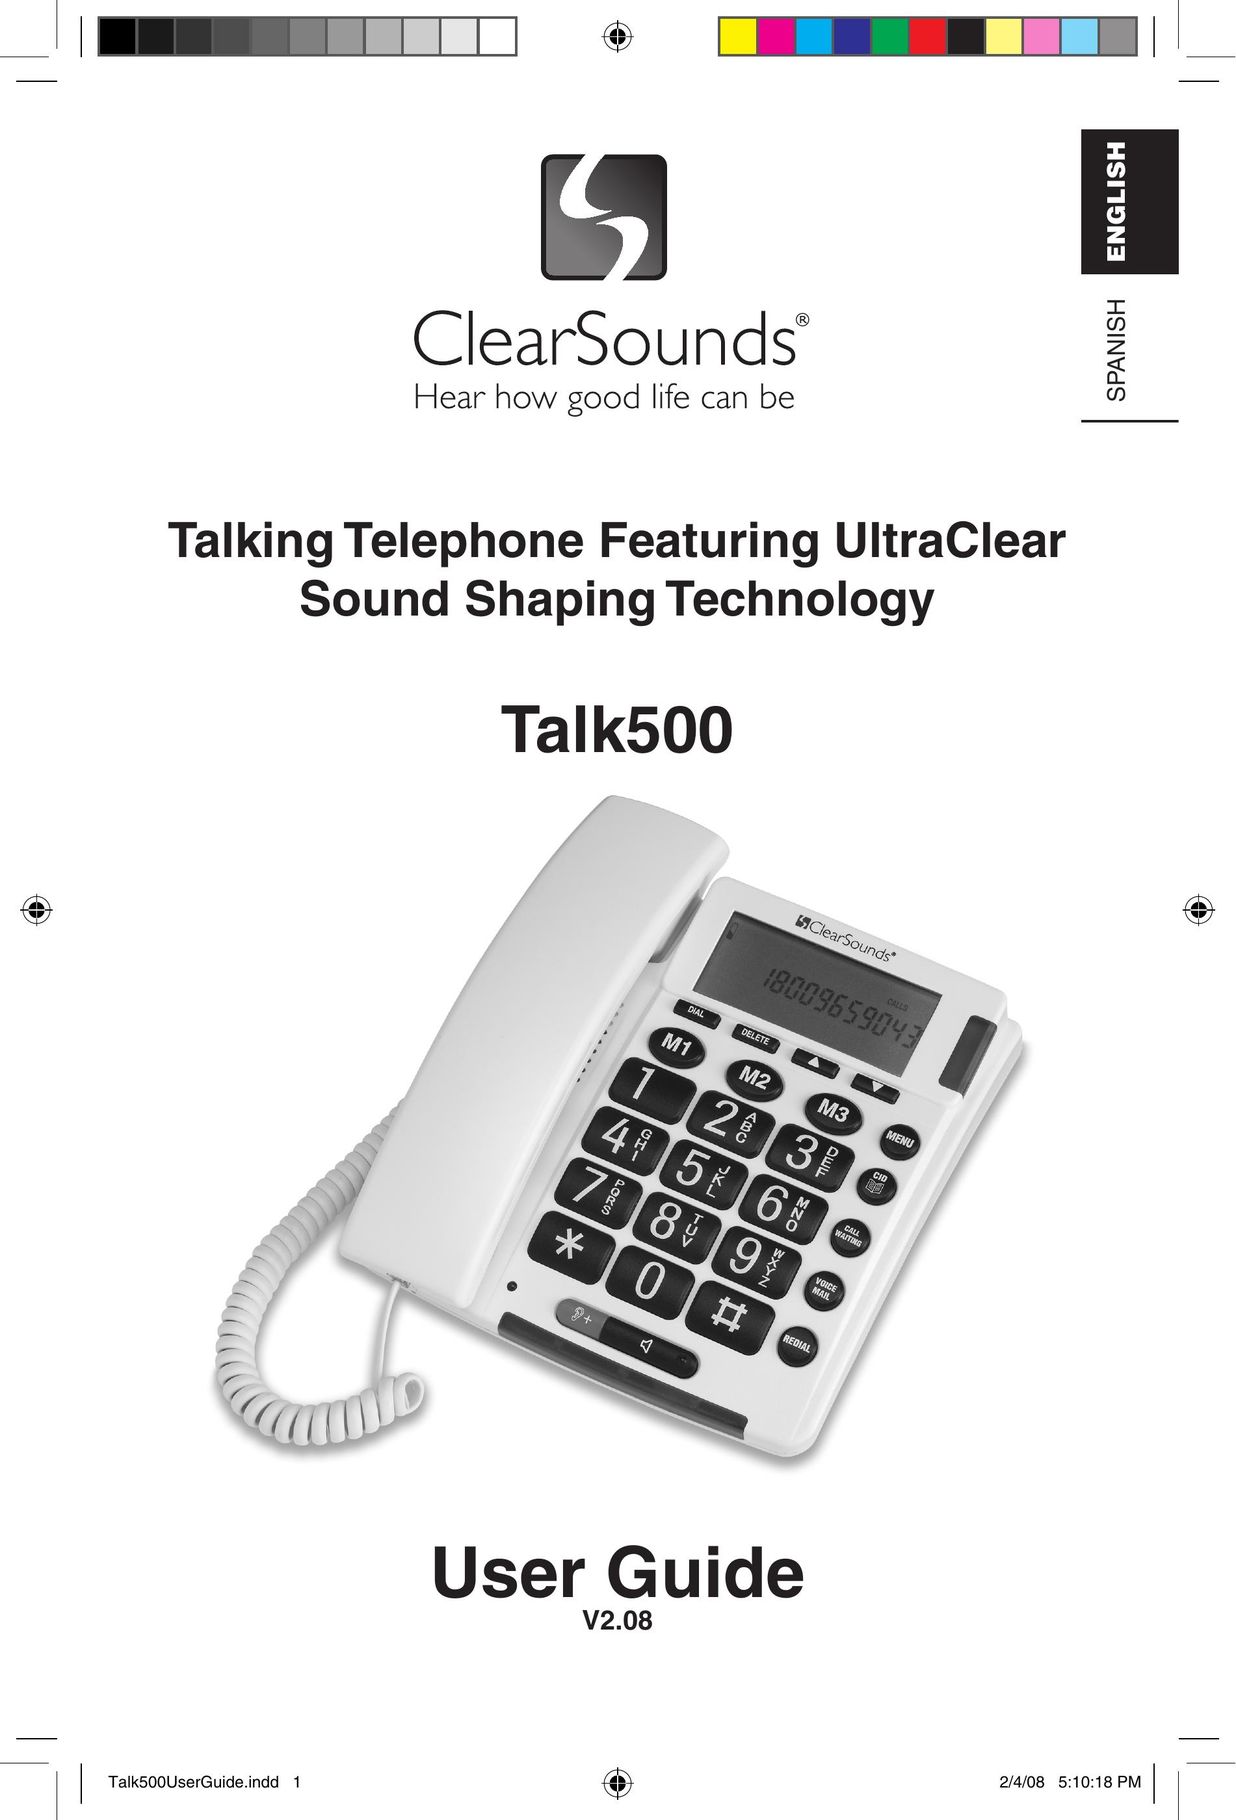 ClearSounds TALK500 Telephone User Manual